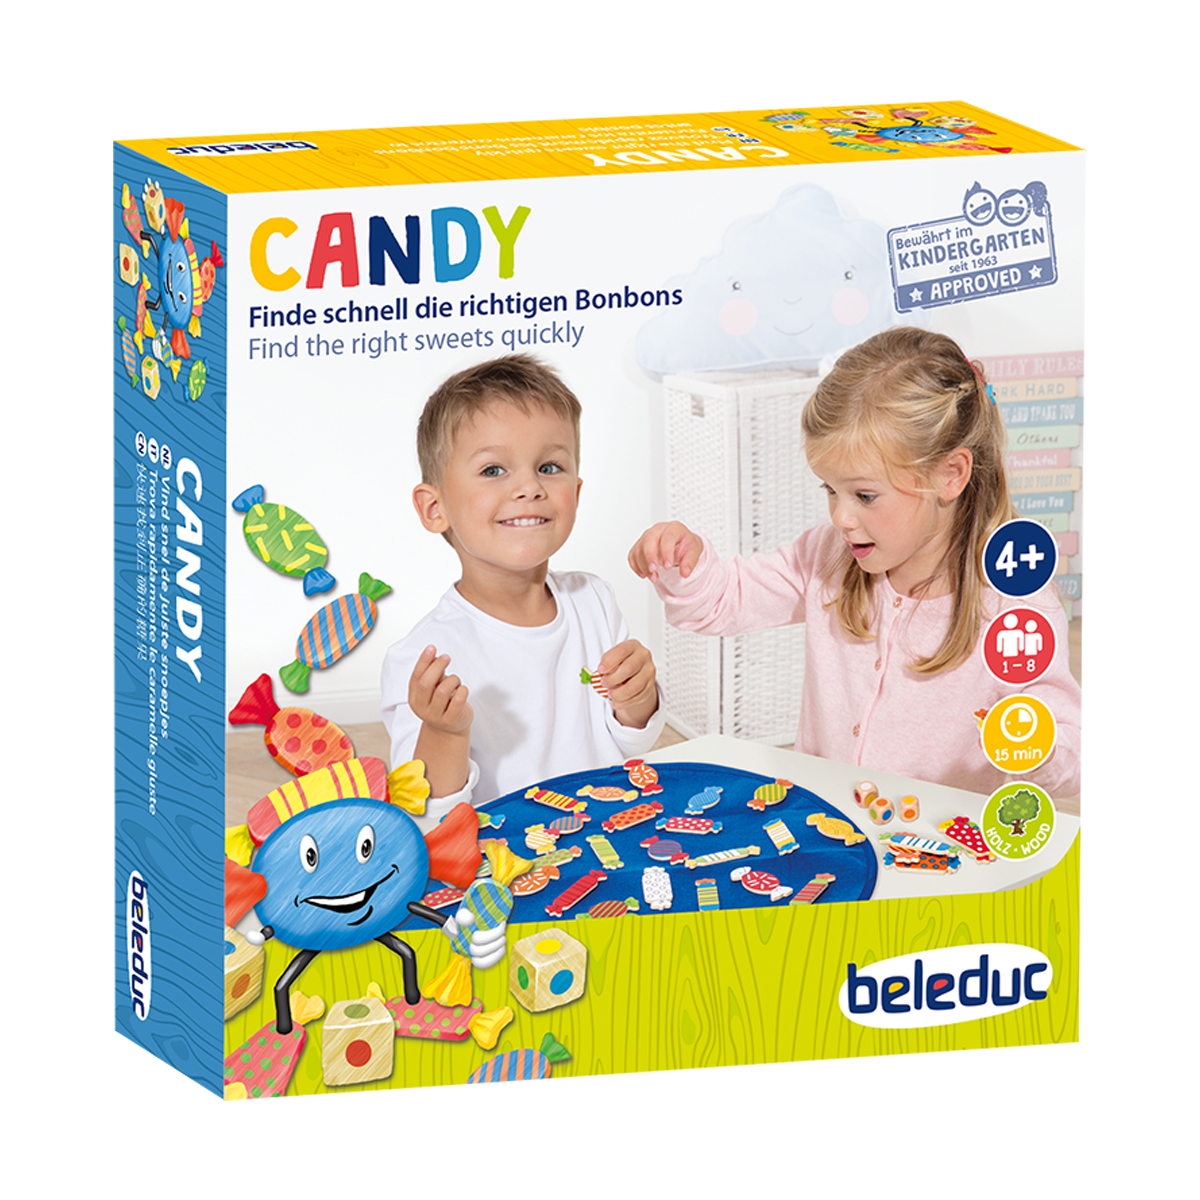 Beleduc Candy Color Matching Game 糖果配對遊戲